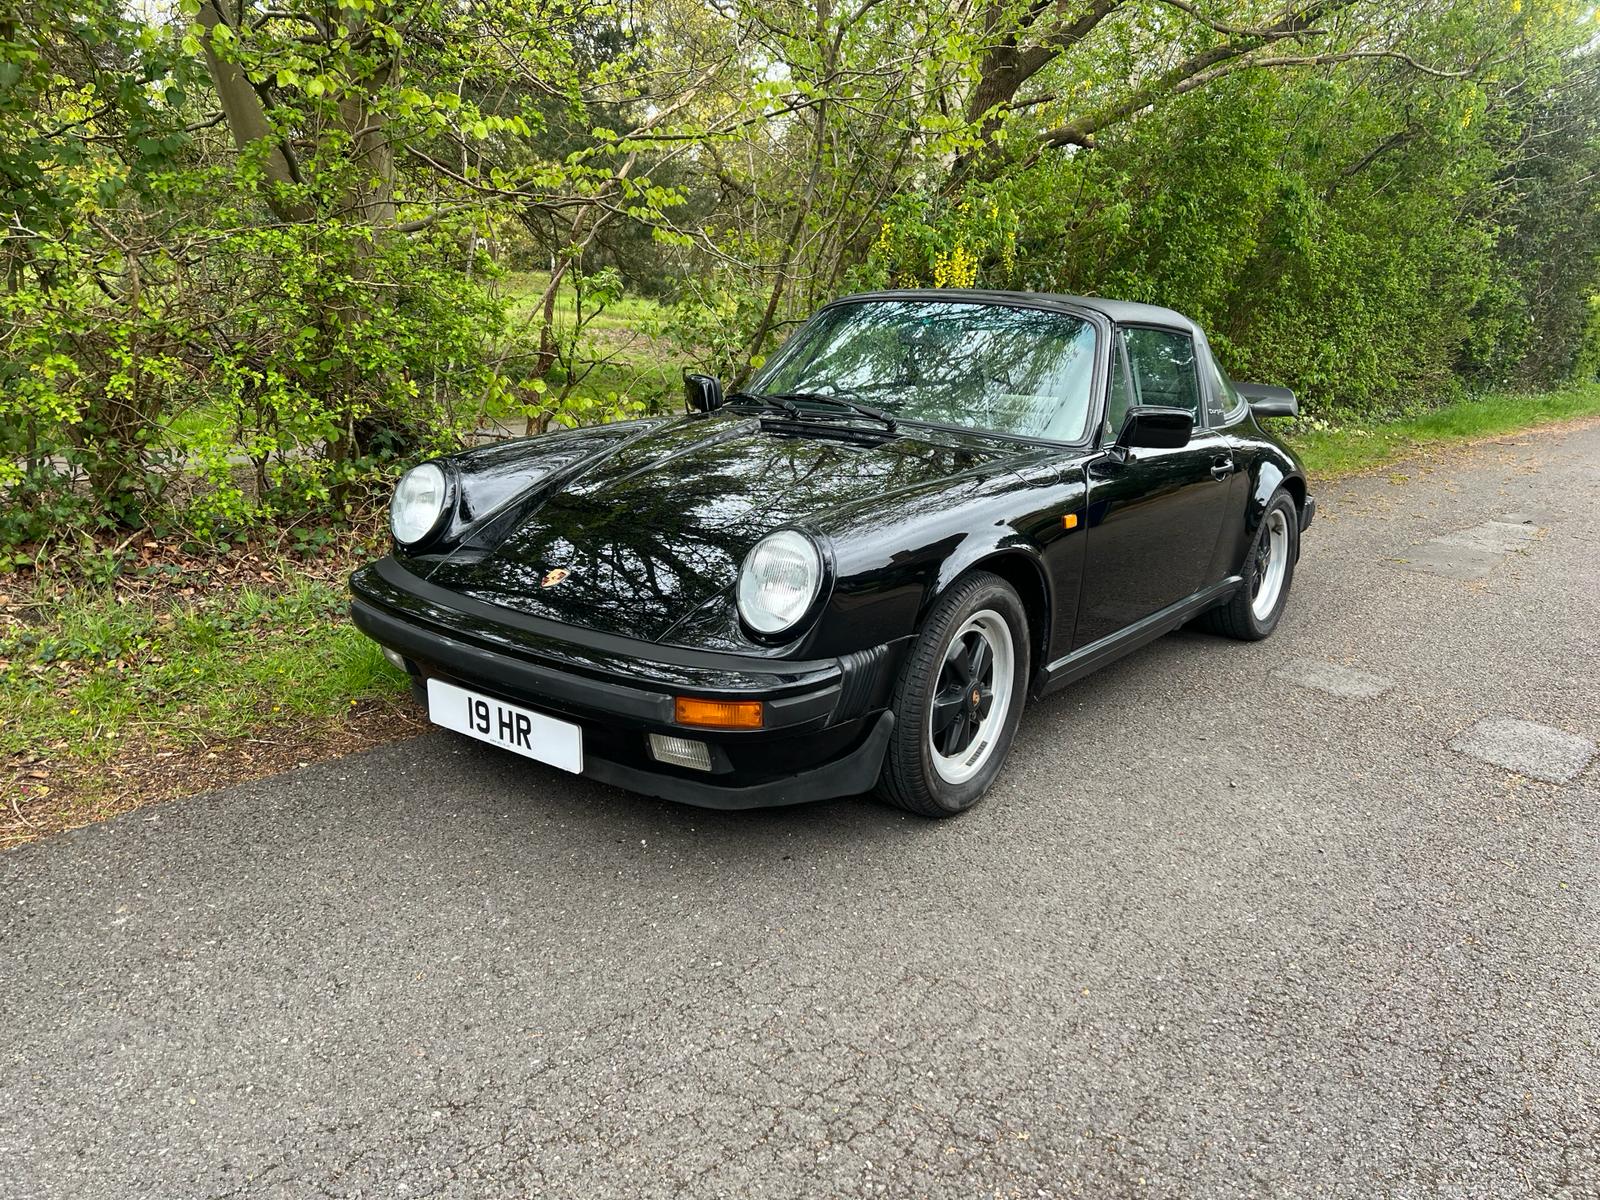 1988 Porsche Carrera Targa 3.2 - 61,000 miles of which only 3500 in past 25 years with current owner - Image 4 of 15